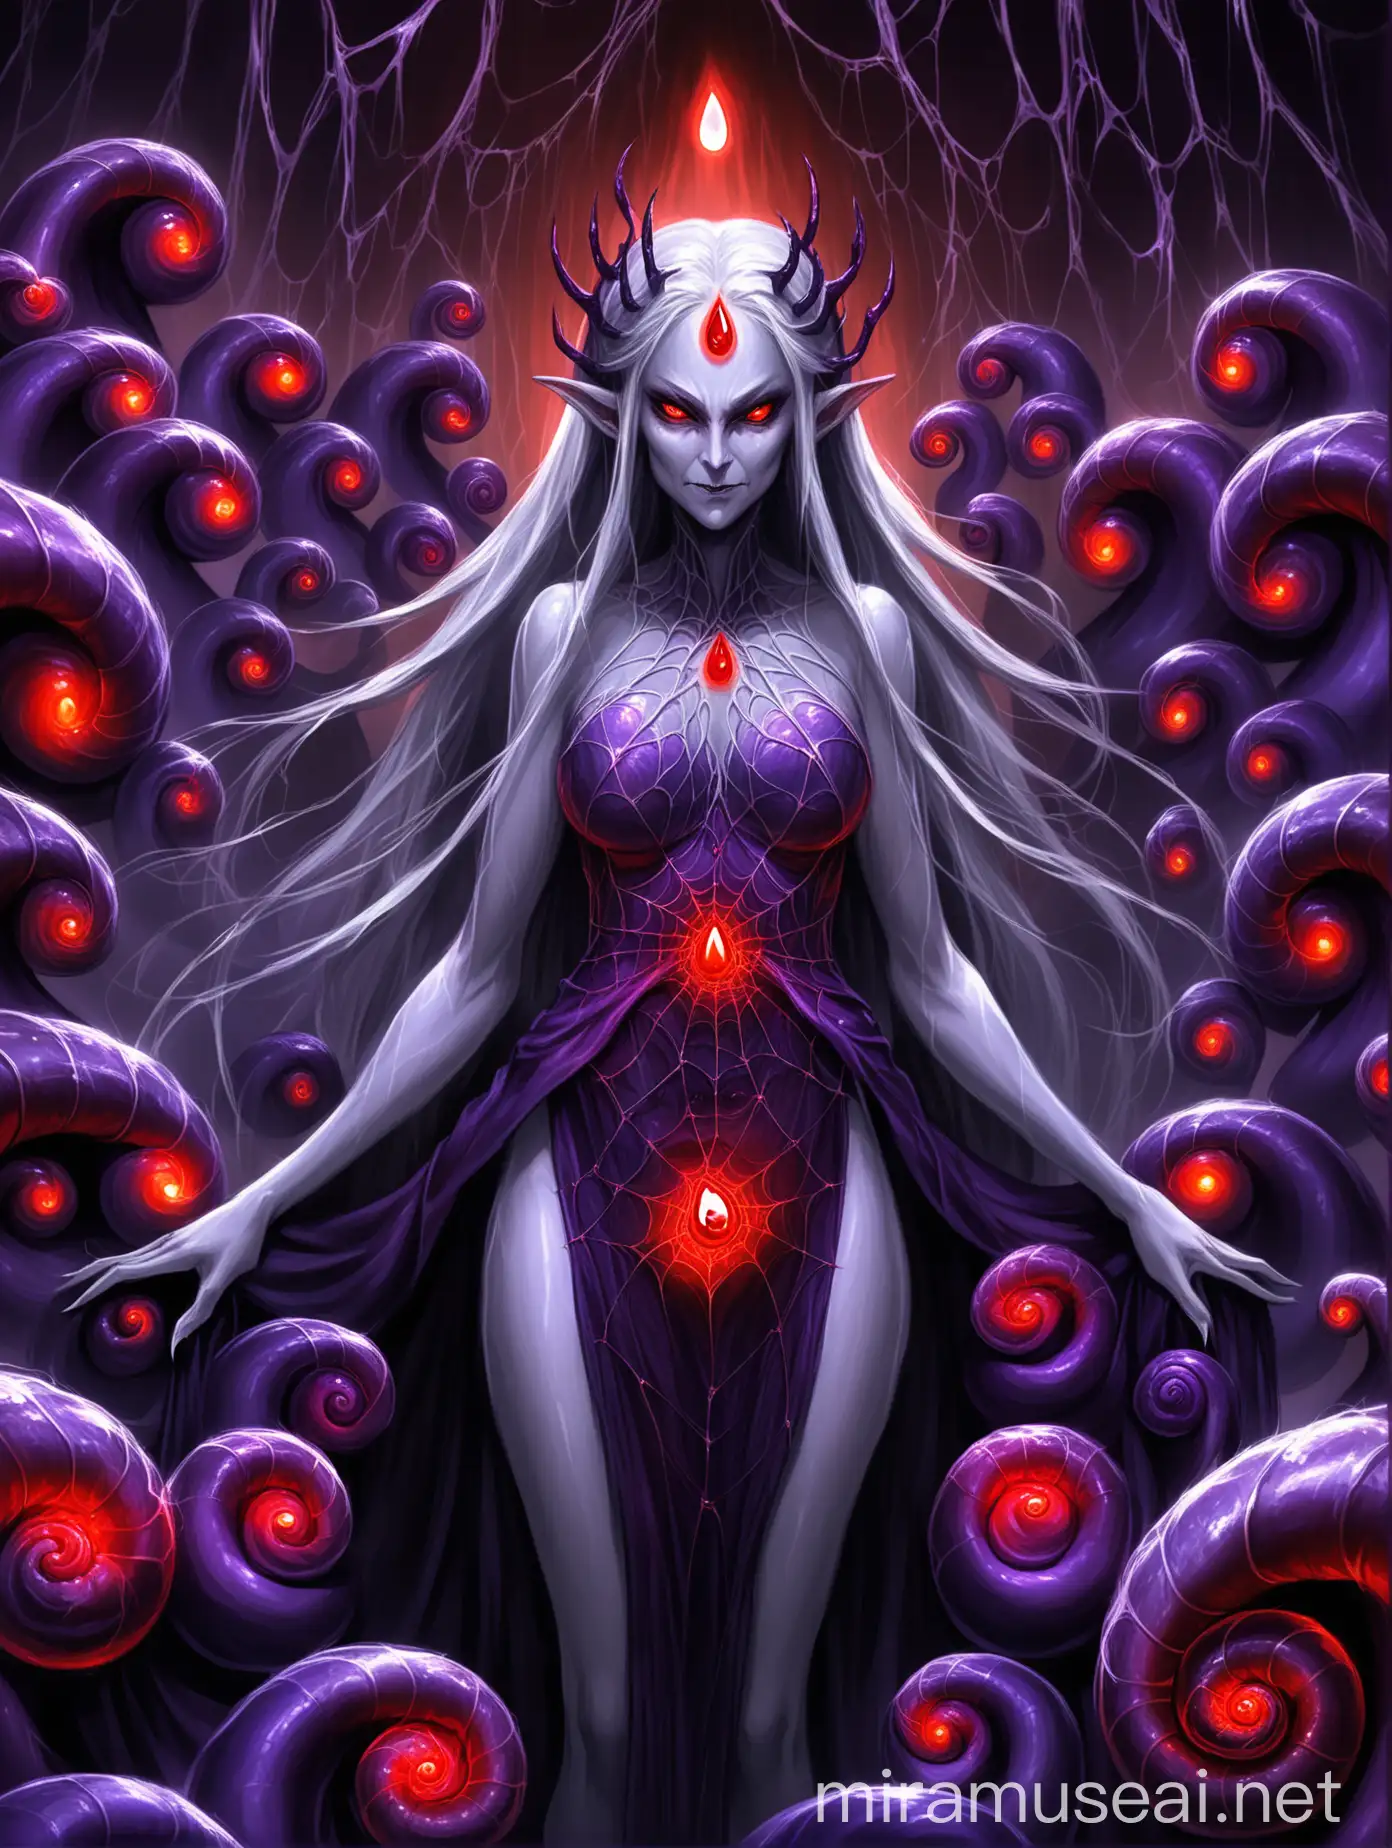 The picture has a dark gloomy purple background with a pattern of webs glistening with teardrop shaped gemstones in different colors stretching across. In the Center is a fullbody shot of the Torso and Head of a beautiful & vain middle-aged dark elf woman that has an extremely intimidating & cruel smirk on her face. From her waist down, her body is that of a slug and behind her is one single large purple snail shell, covered in many red glowing eyes.  Her Hair is white. The picture should have the overall feeling of looking at an evil Goddess.